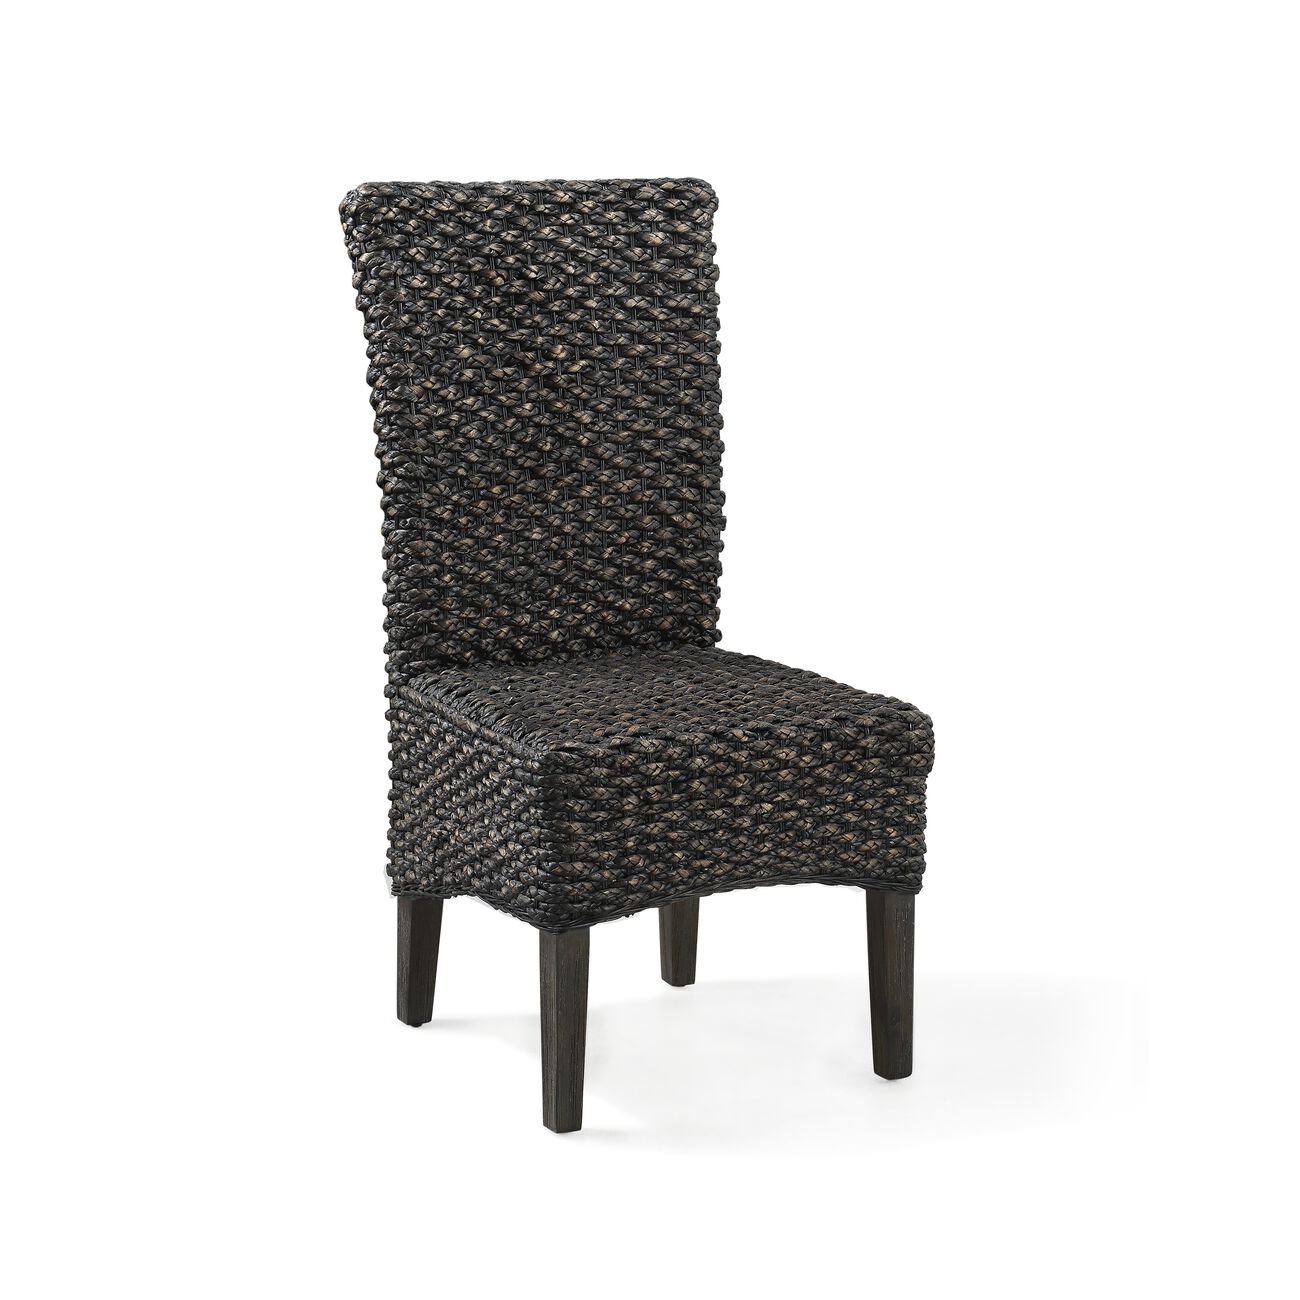 Woven Water Hyacinth Wooden Chair with Tapered Legs, Black